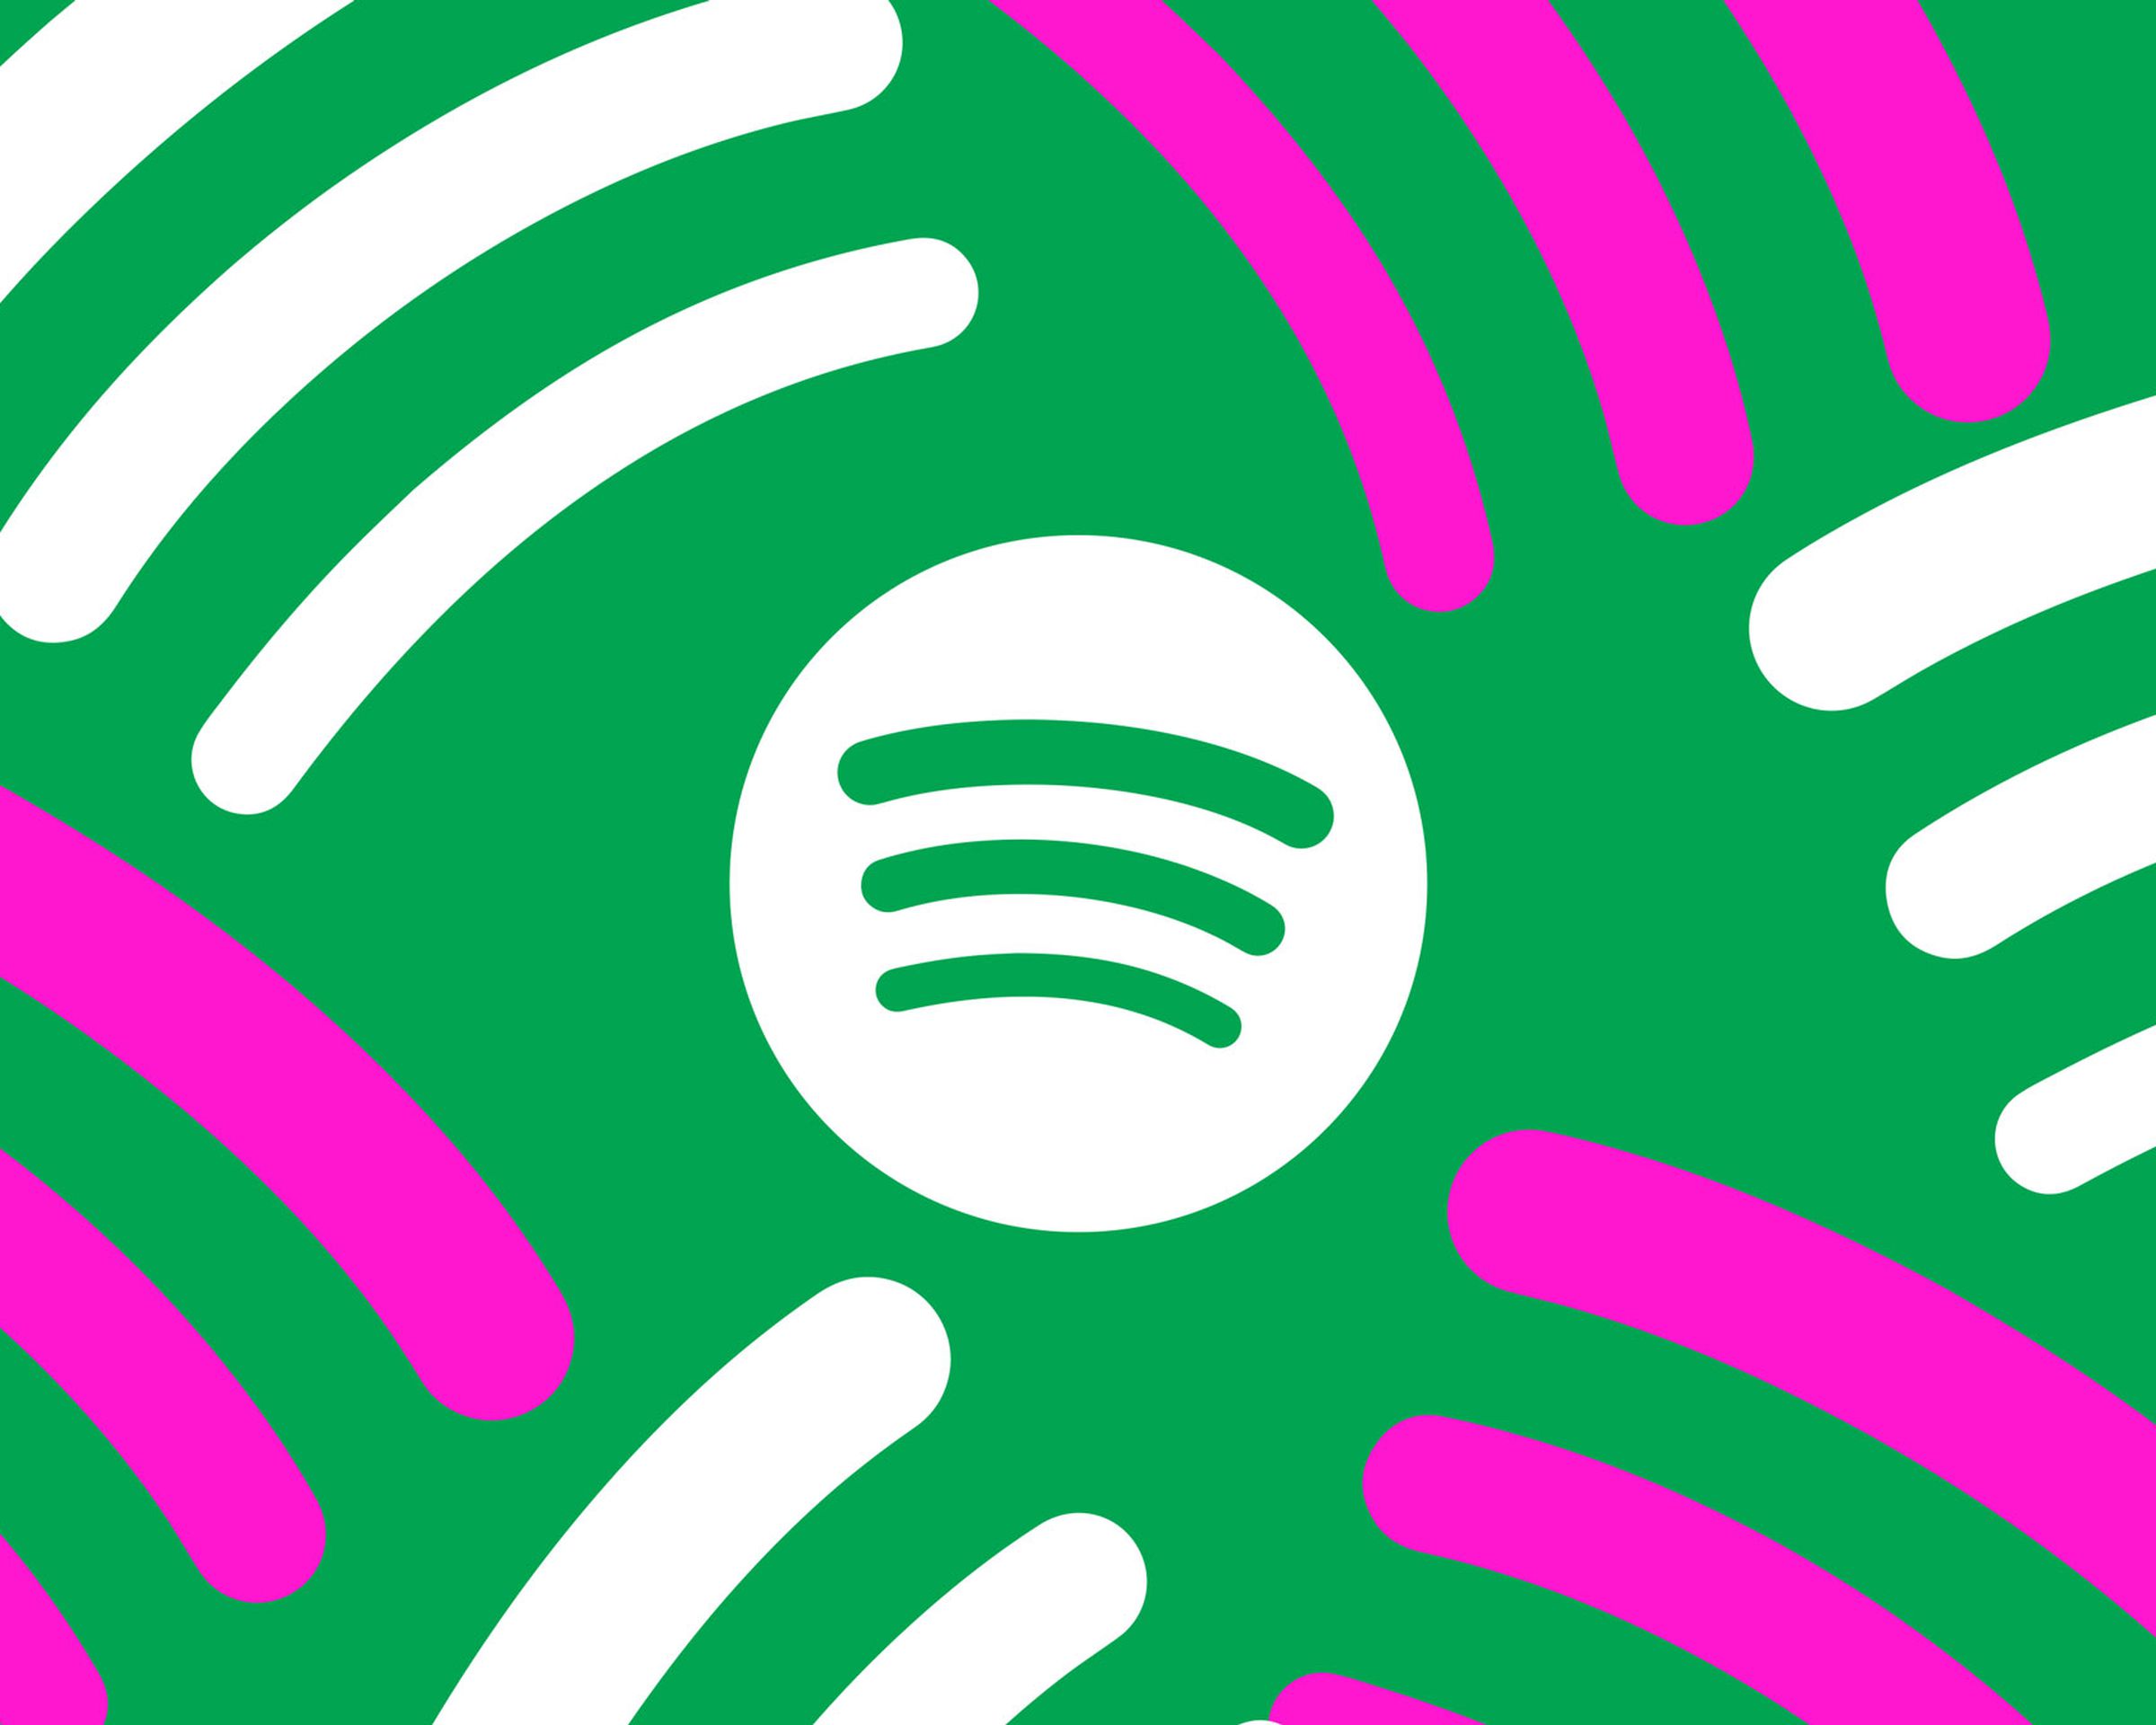 The Spotify logo on a green backdrop surrounded by pink and white graphics.